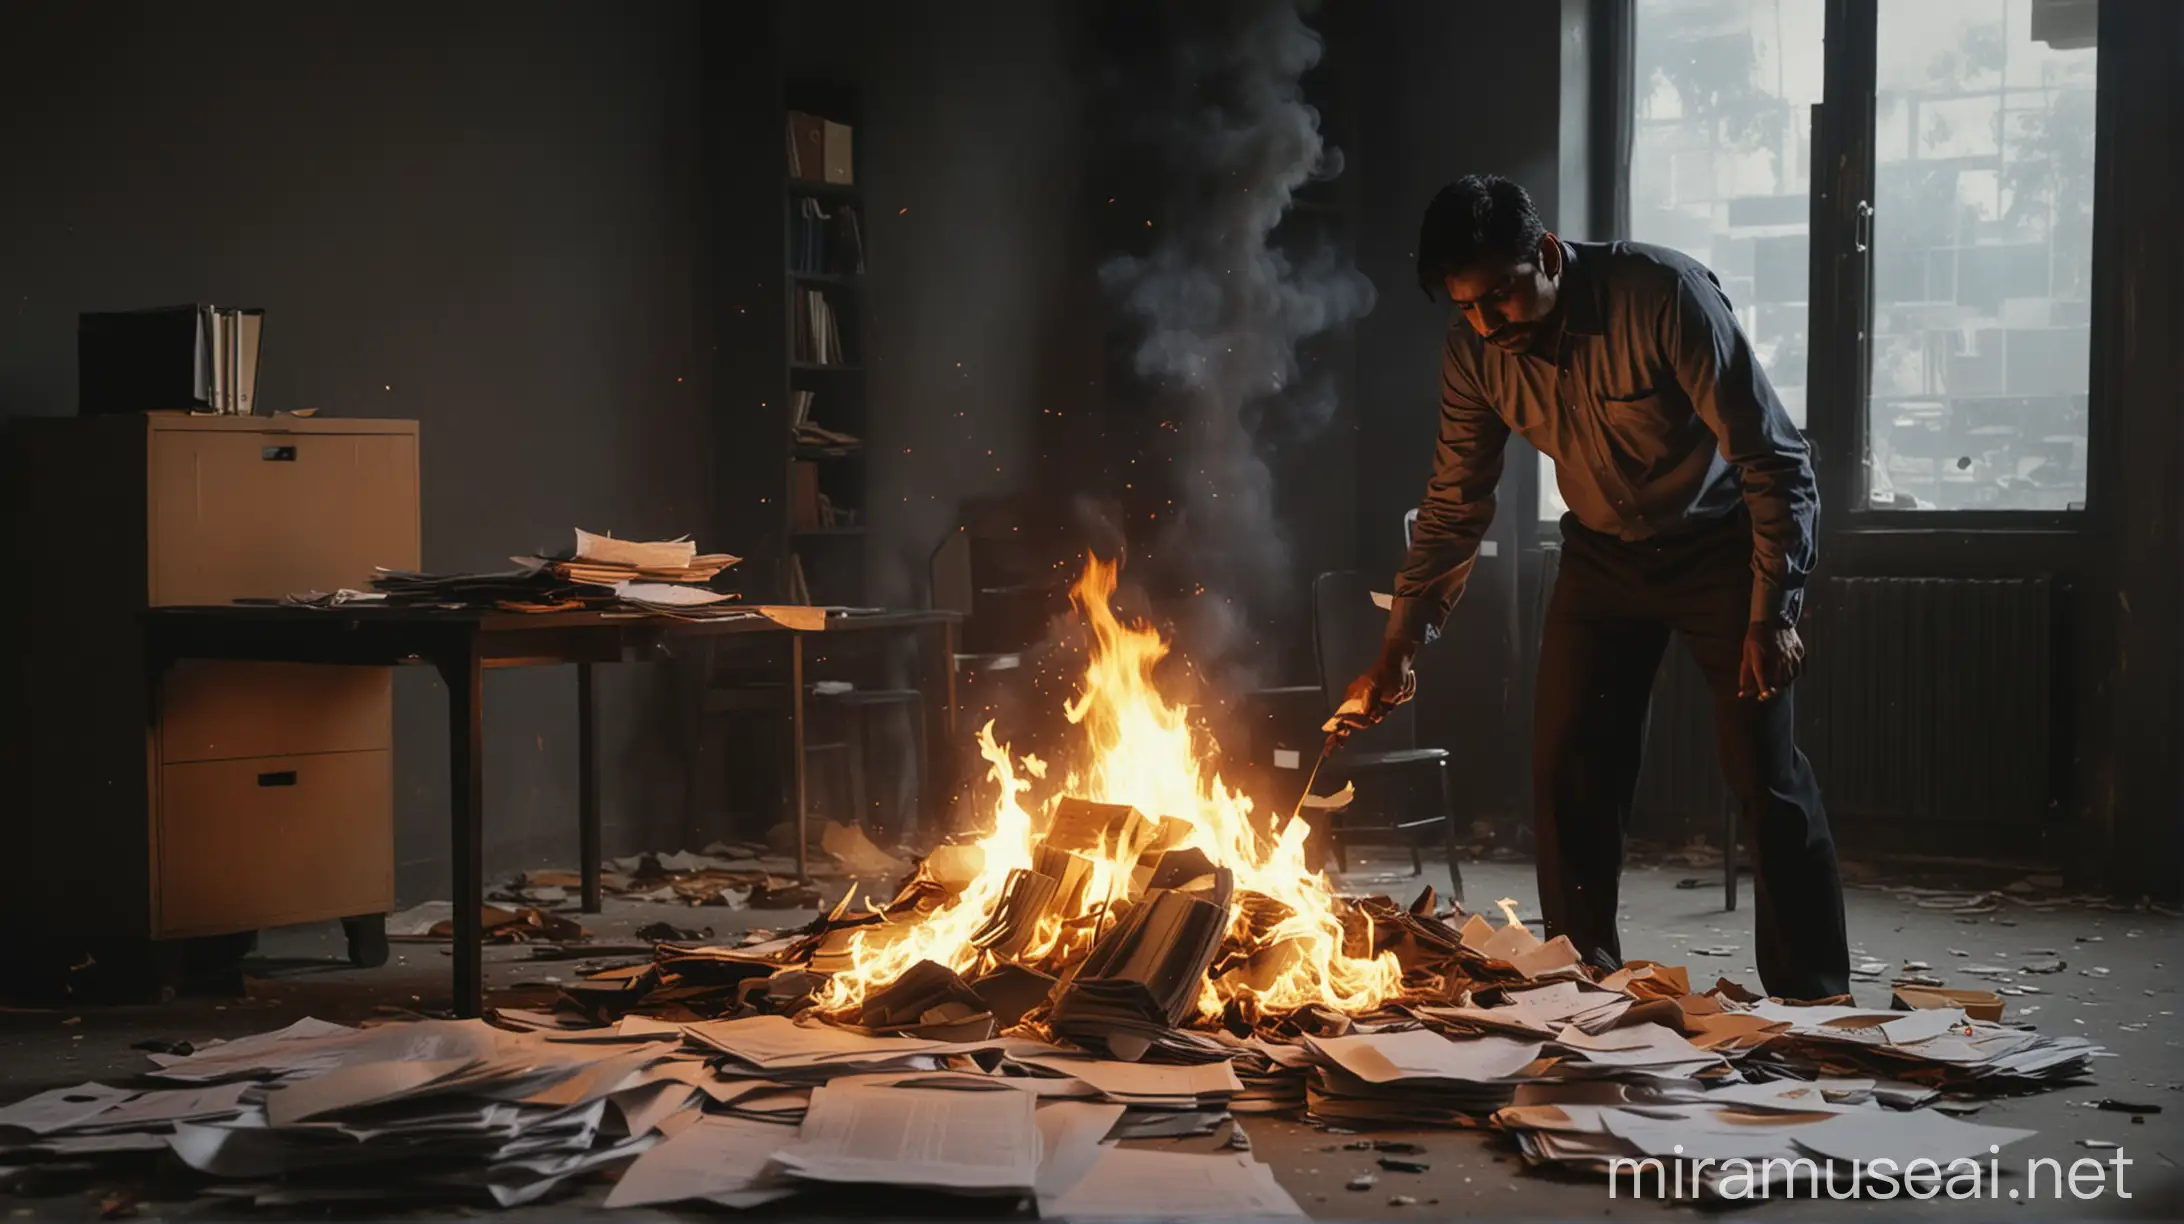 An Indian man is setting fire to the office furniture, fire on some papers and files, dark scene, shot from behind